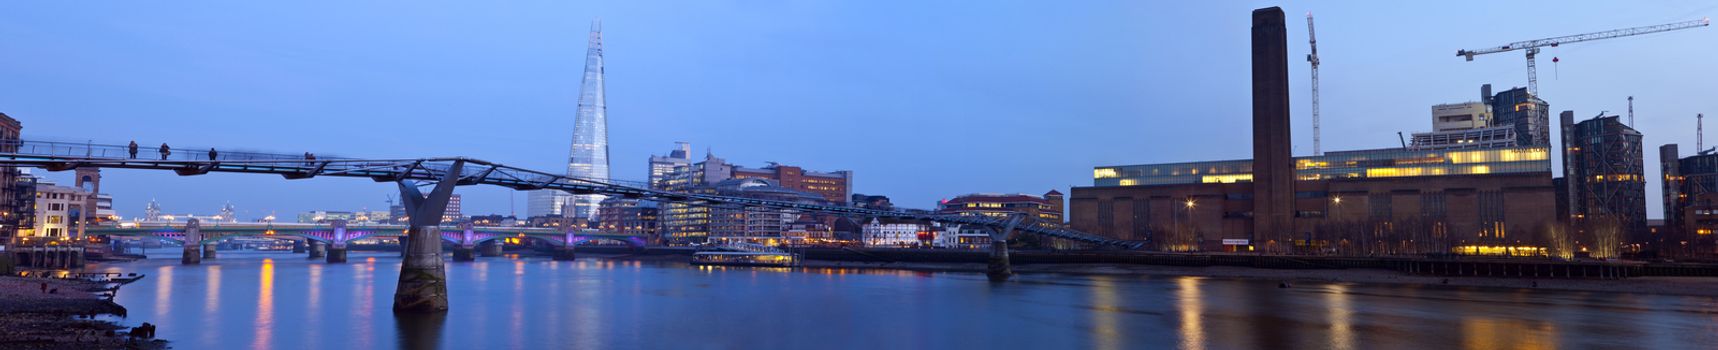 A panoramic view of London taking in the sights including the River Thames, Tate Modern, the Shard, Millennium Bridge, Shakespeare's Gobe Theatre, Blackfriars Bridge and Tower Bridge in the distance.